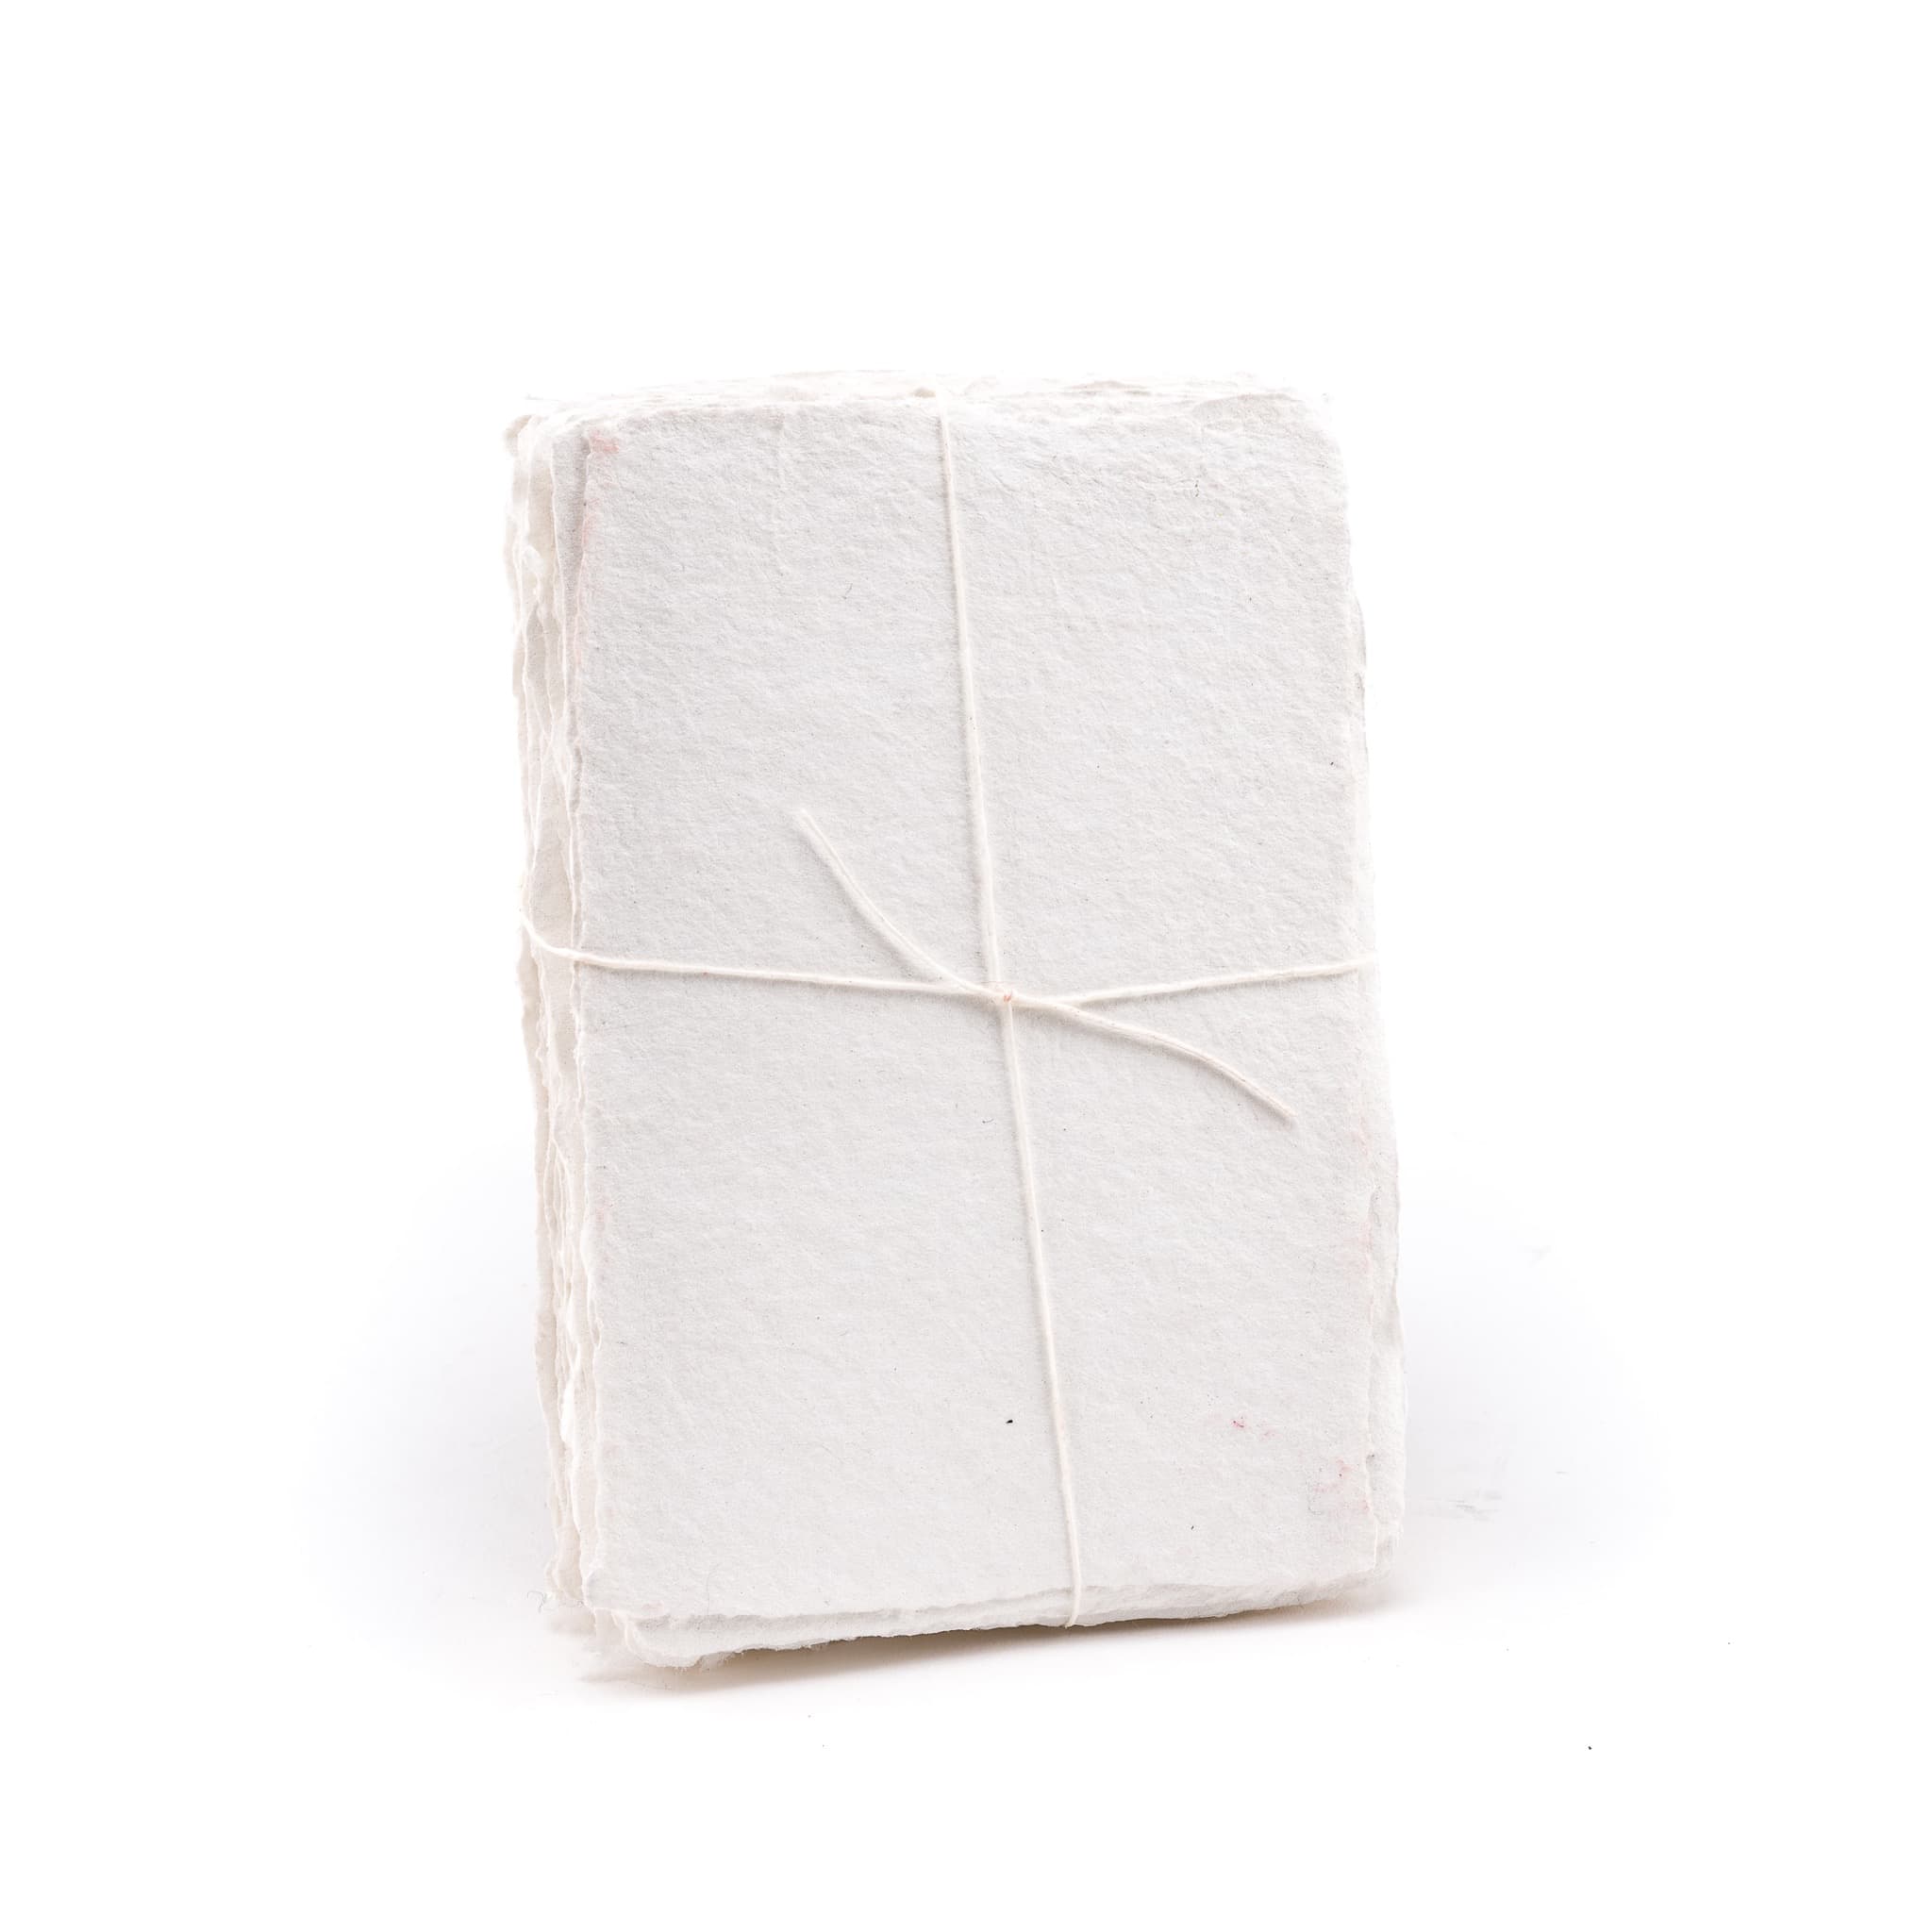 Pack of white shimmering handmade paper made with 100% cotton recycled from the apparel industry.